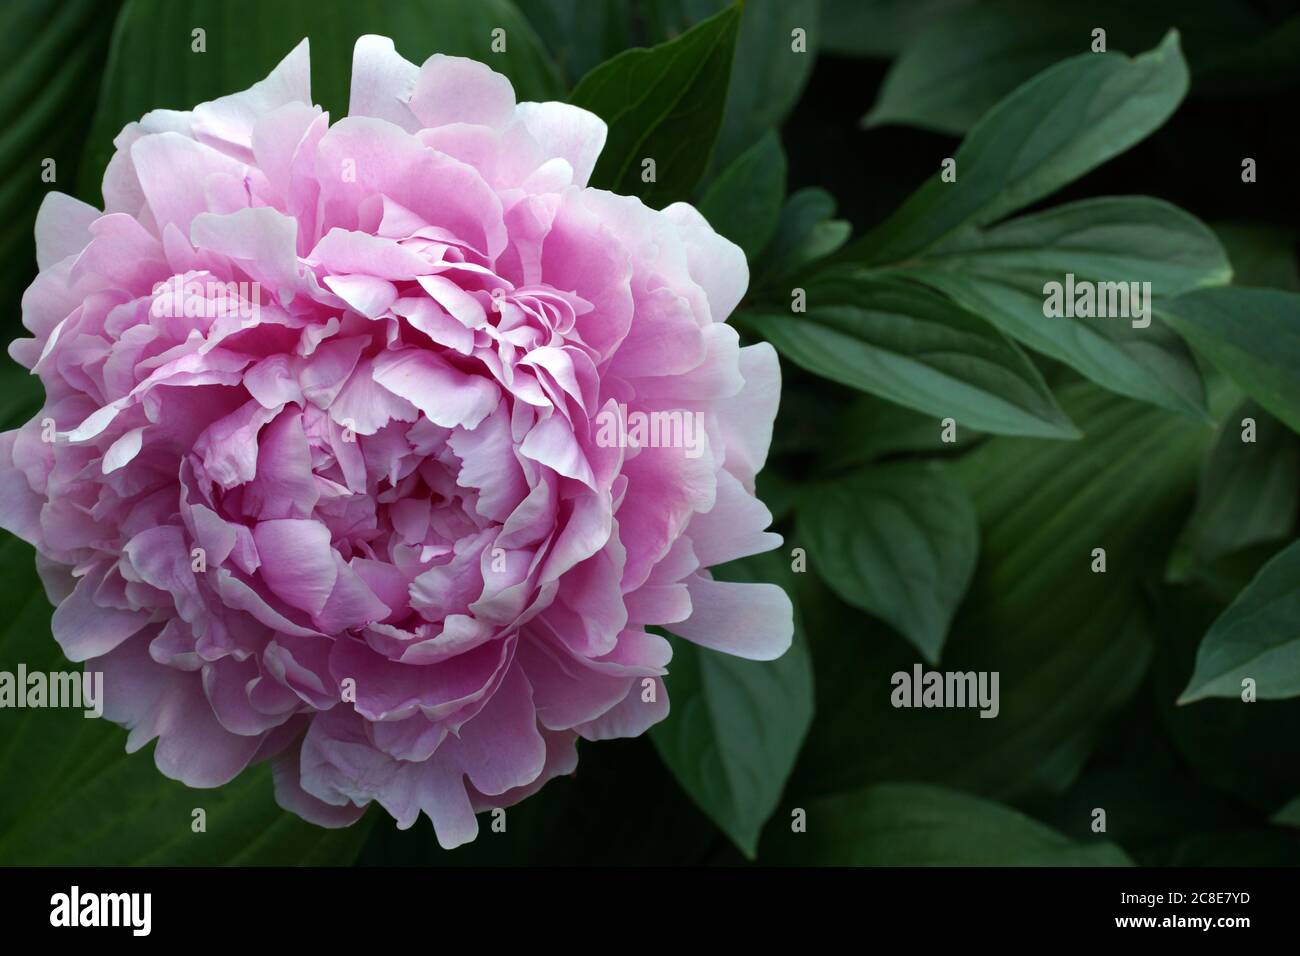 Double pink 'Mrs. Franklin D. Roosevelt peony flowers. Stock Photo